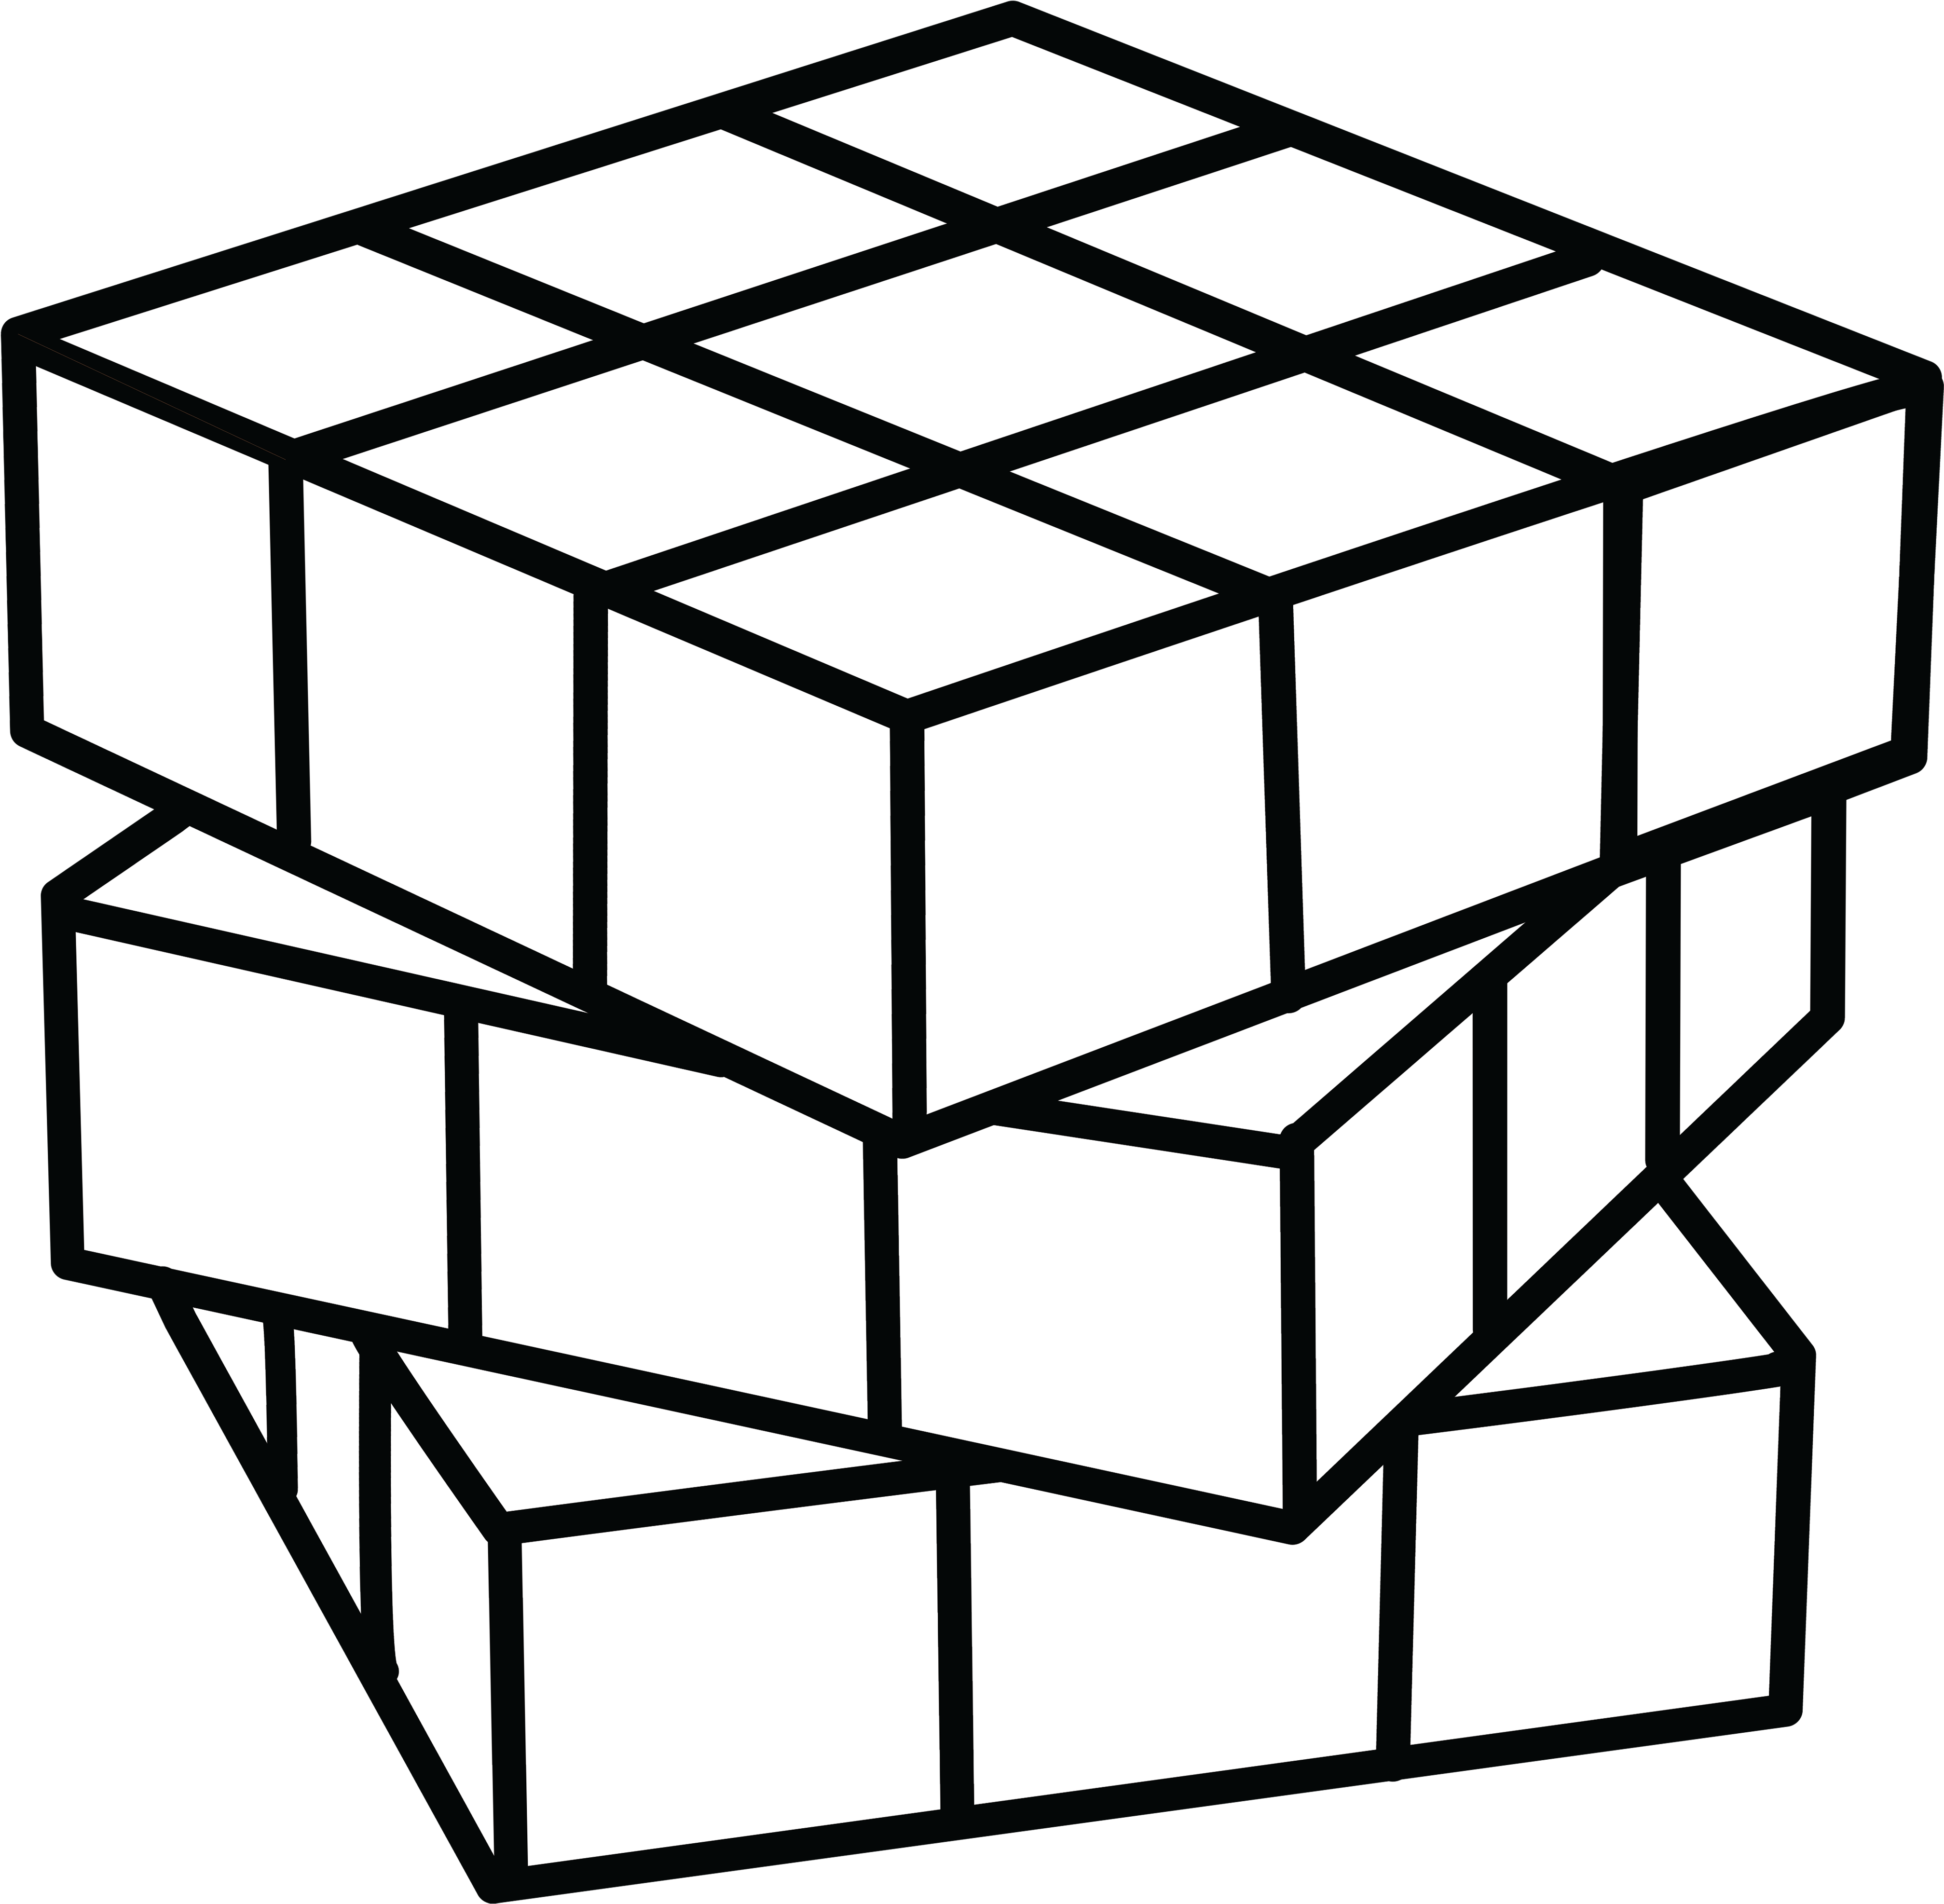 Cube Clipart Coloring Page.